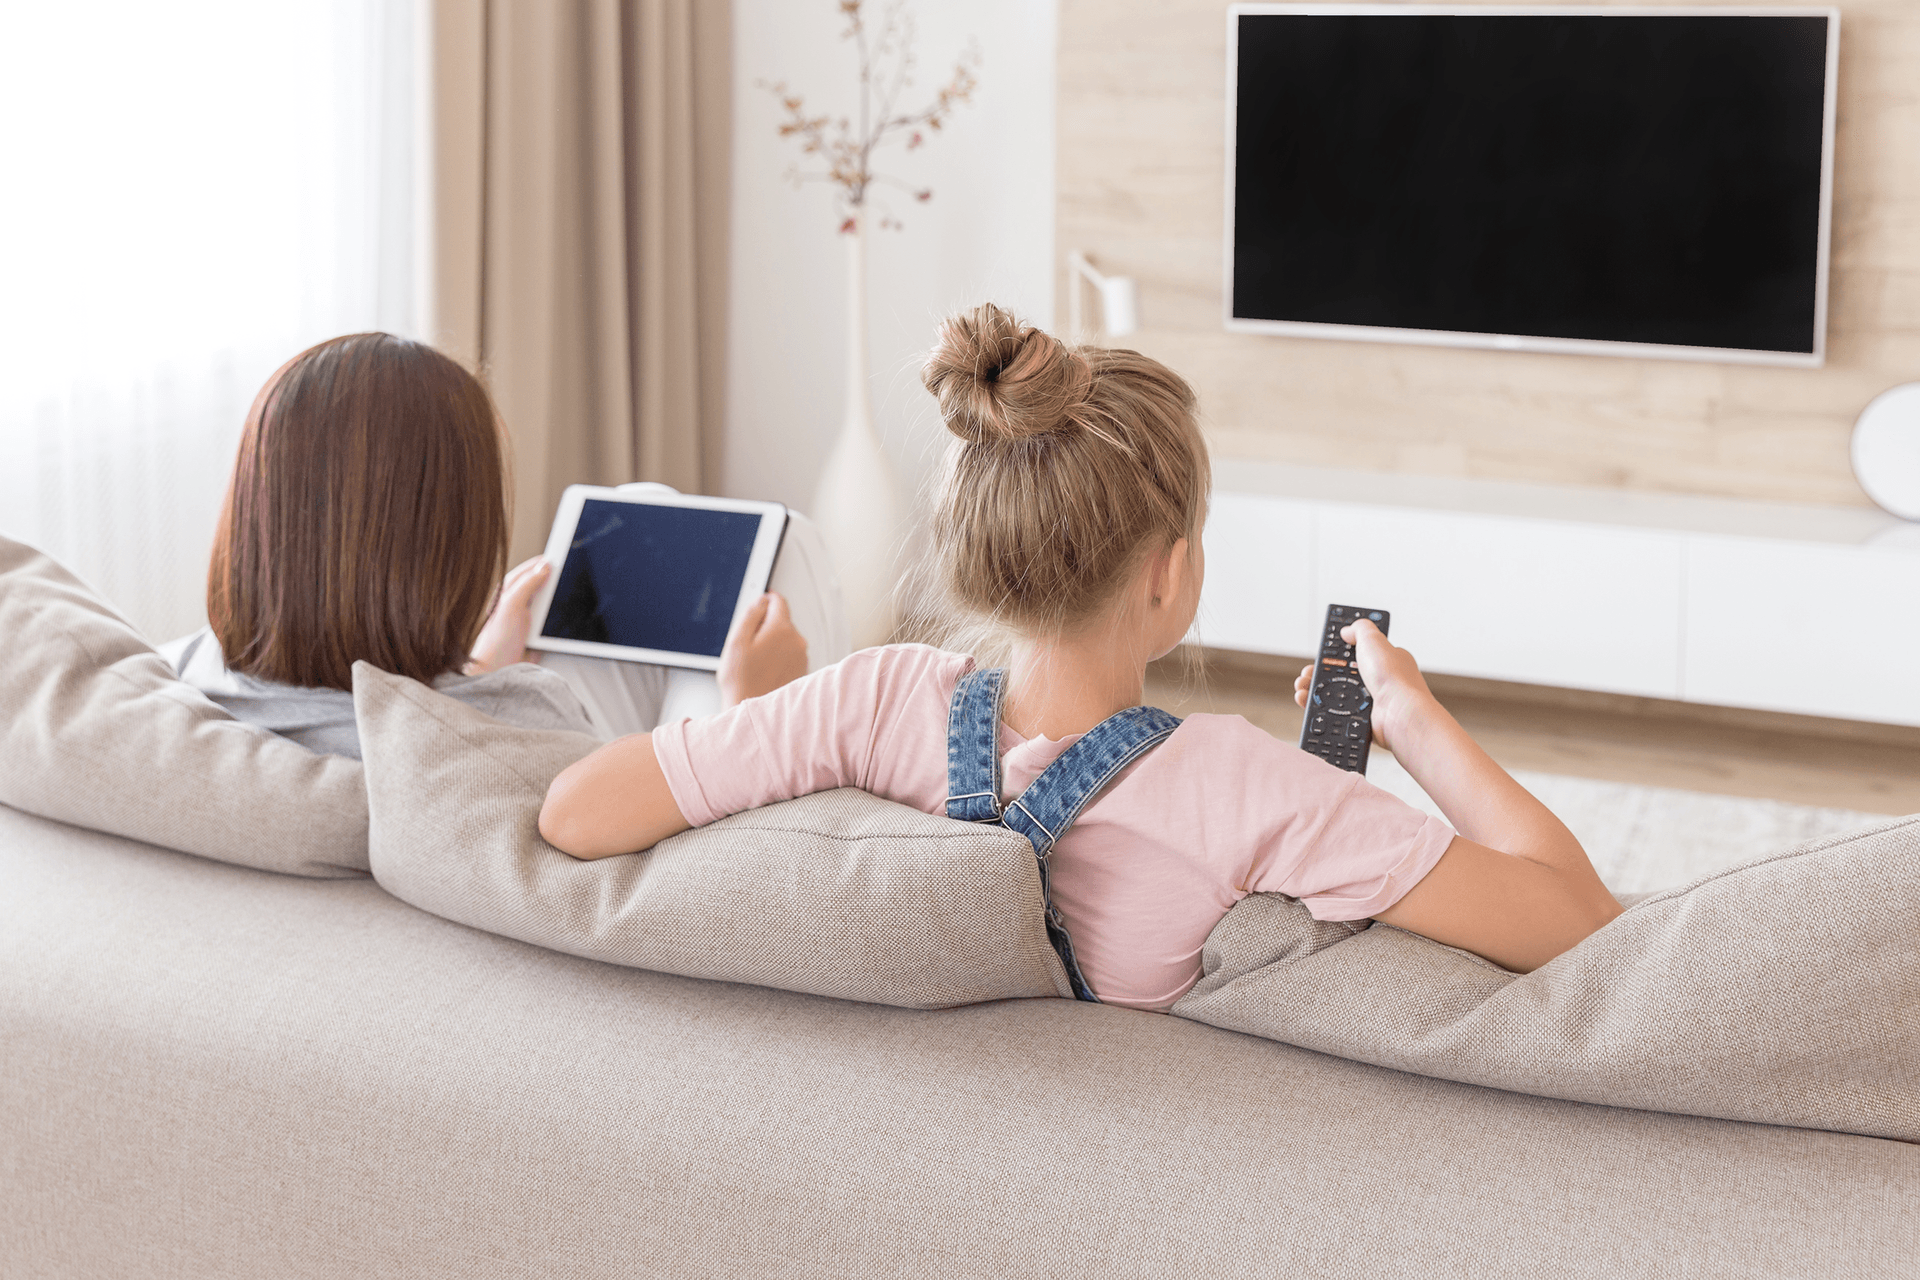 Two women watching tv and a tablet